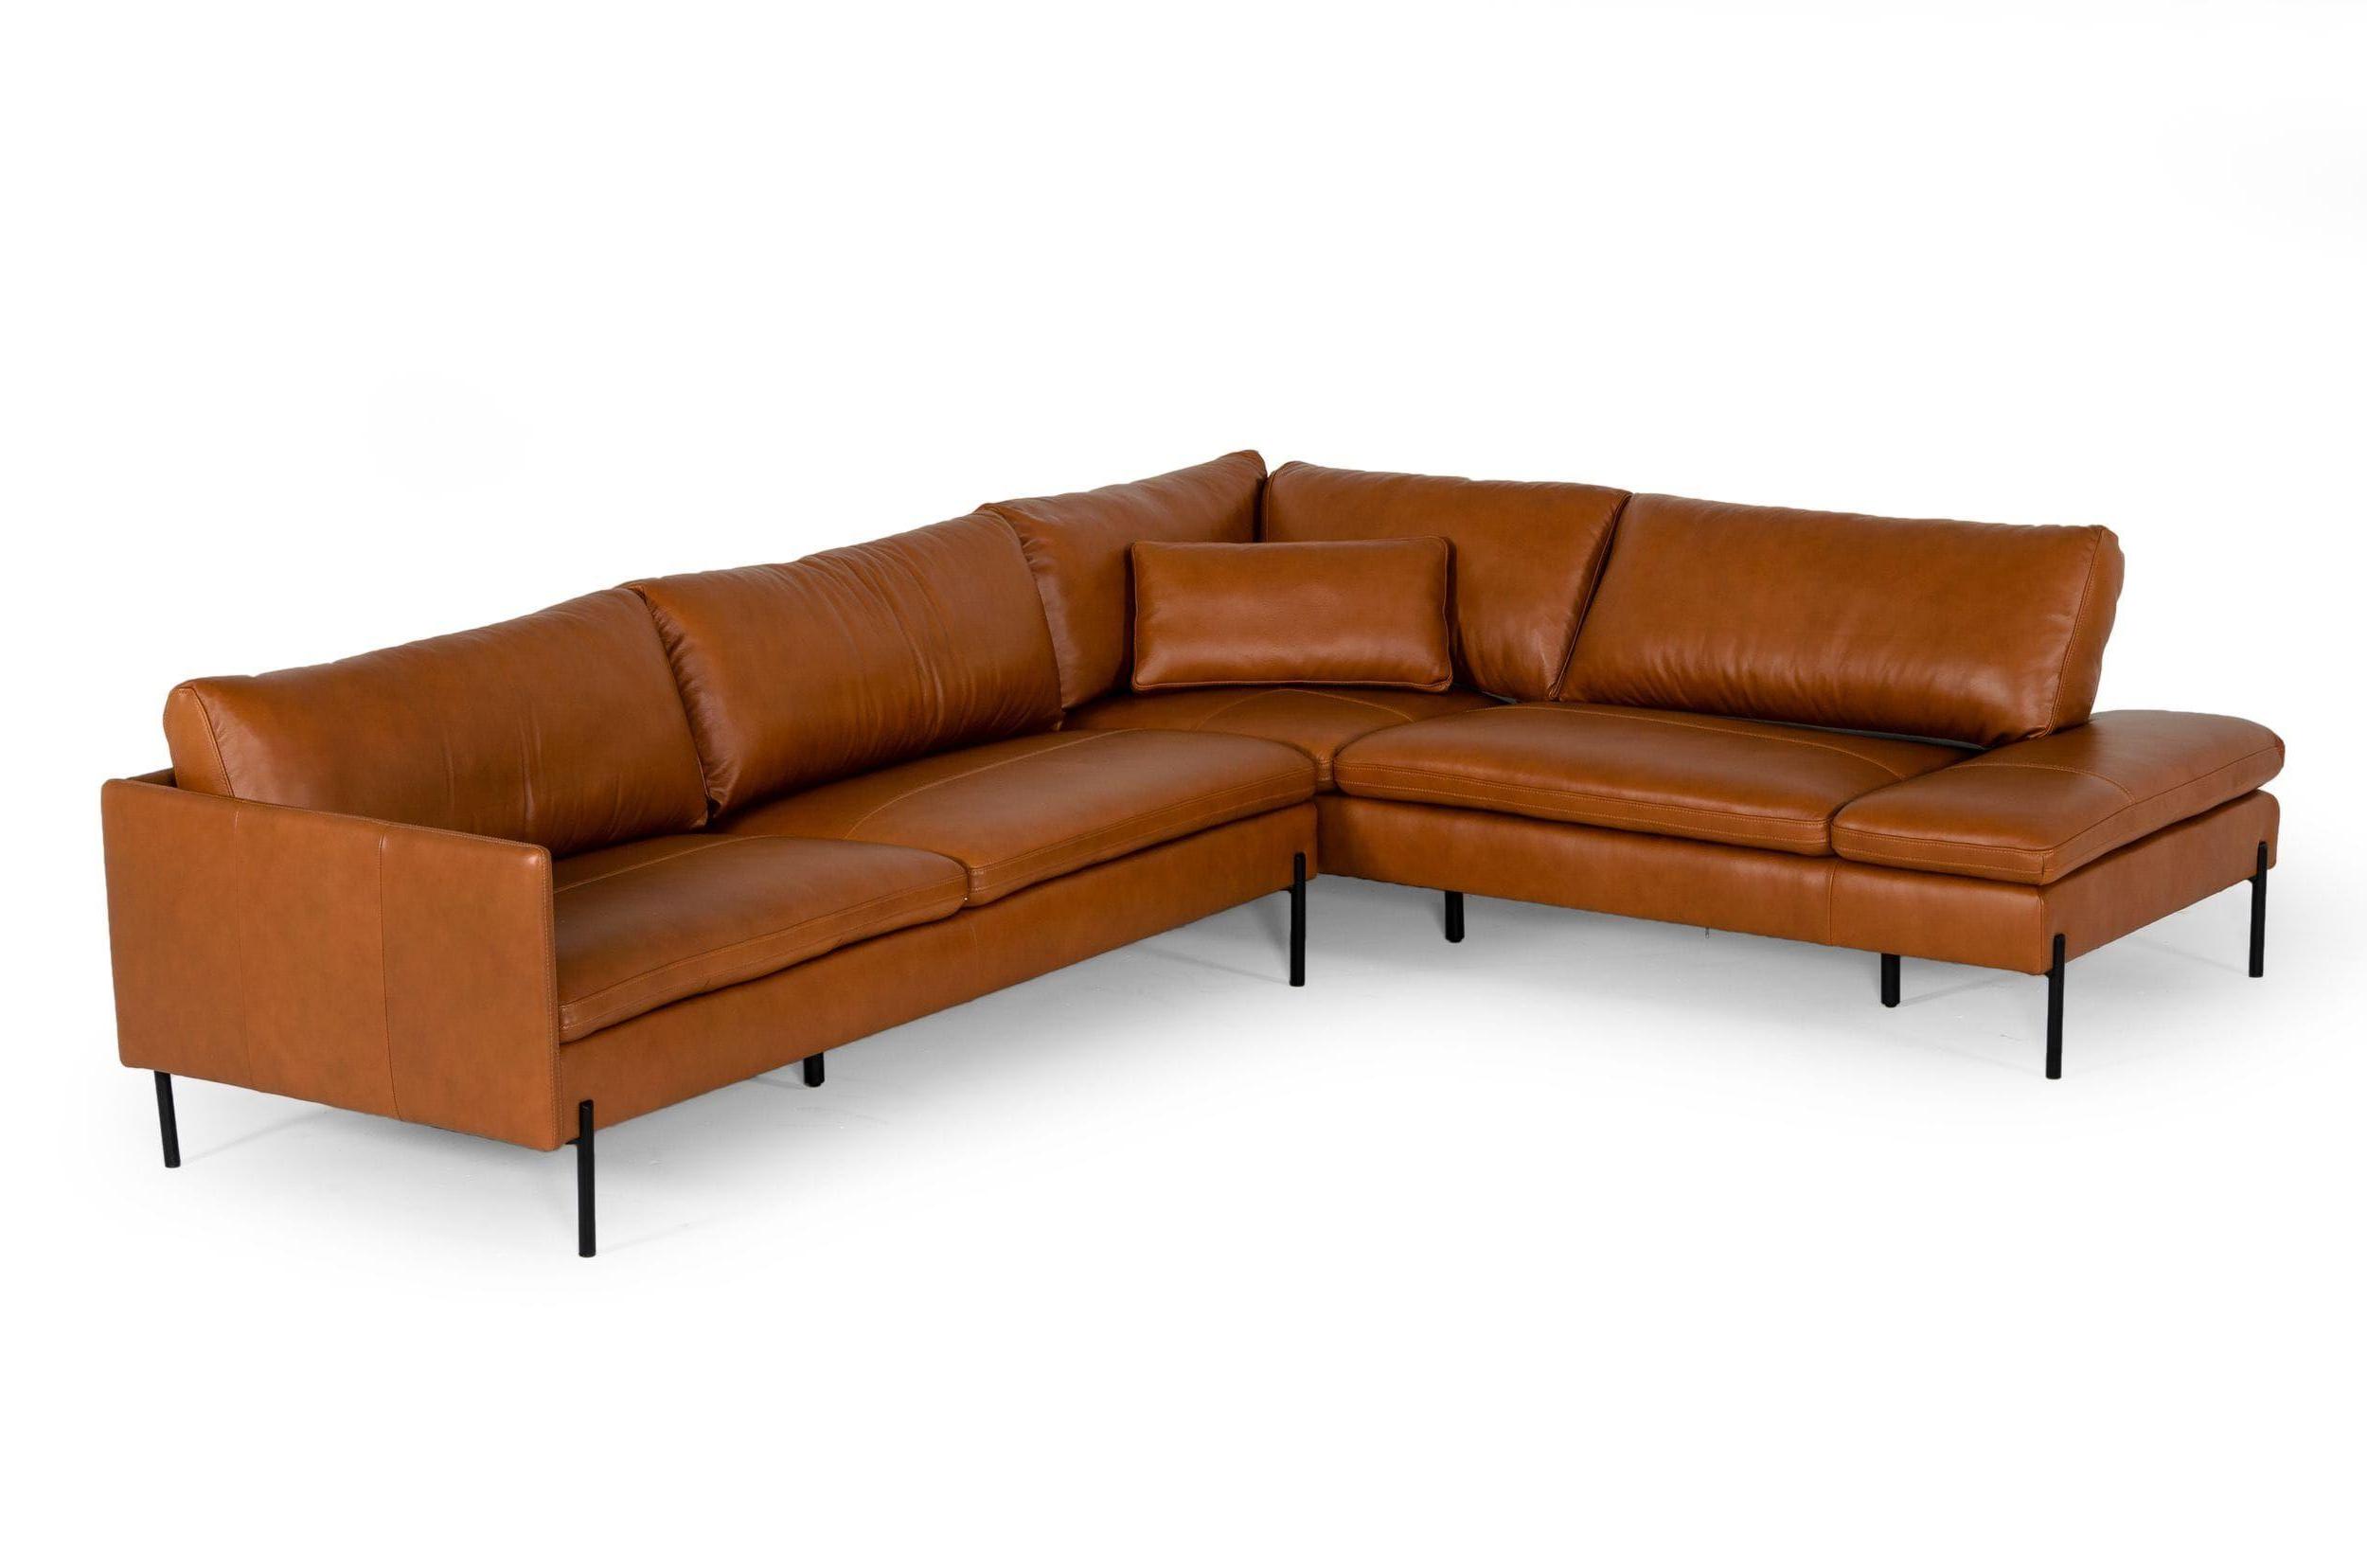 Contemporary, Modern Sectional Sofa VGKKKF.1061Z-CGN-RAF-SECT VGKKKF.1061Z-CGN-RAF-SECT in Cognac Genuine Leather